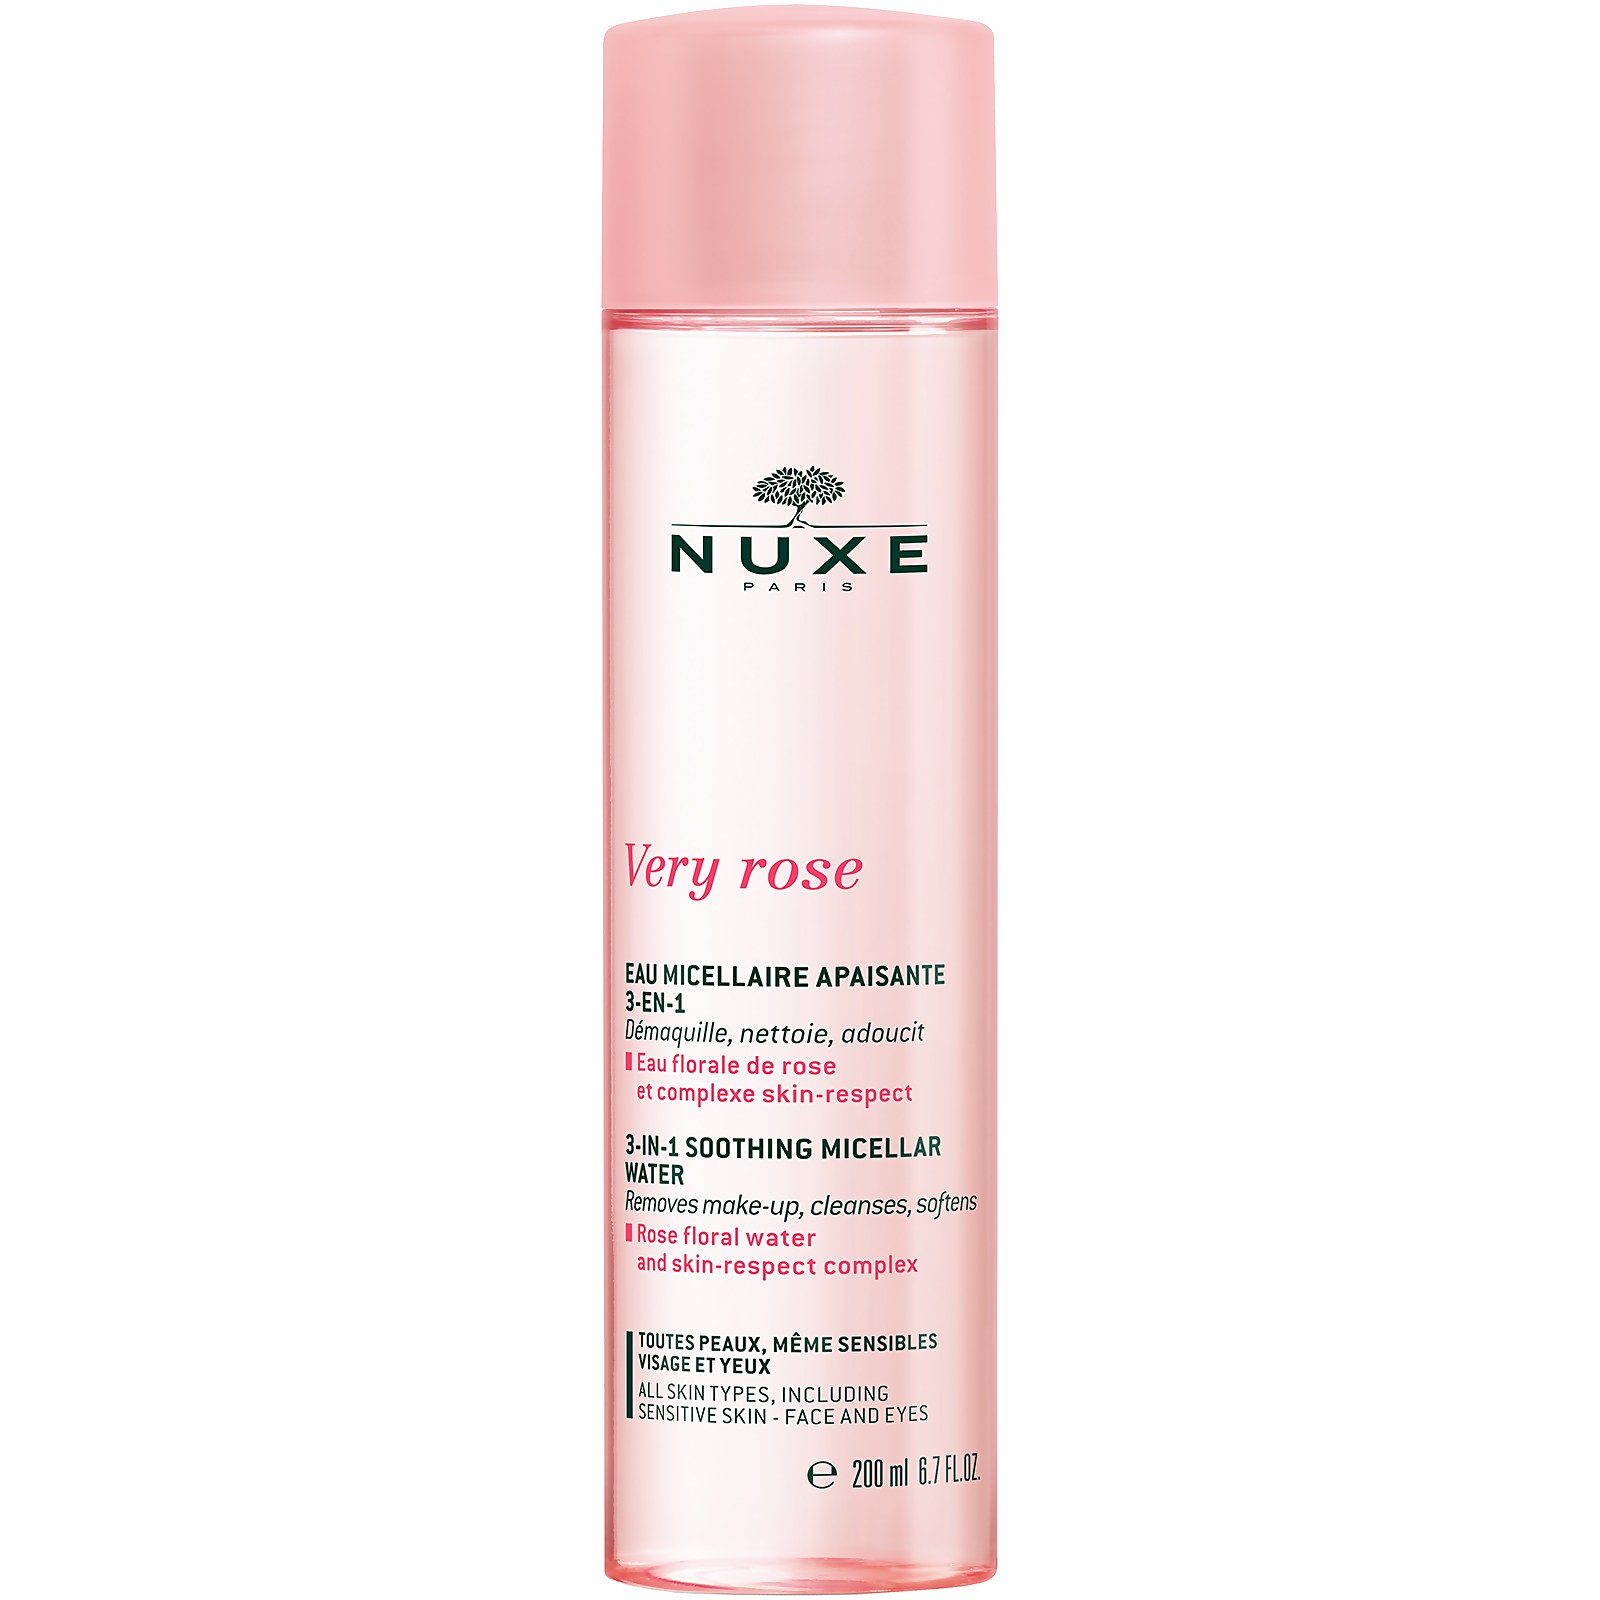 NUXE 3-in-1 Soothing Micellar Water 200ml